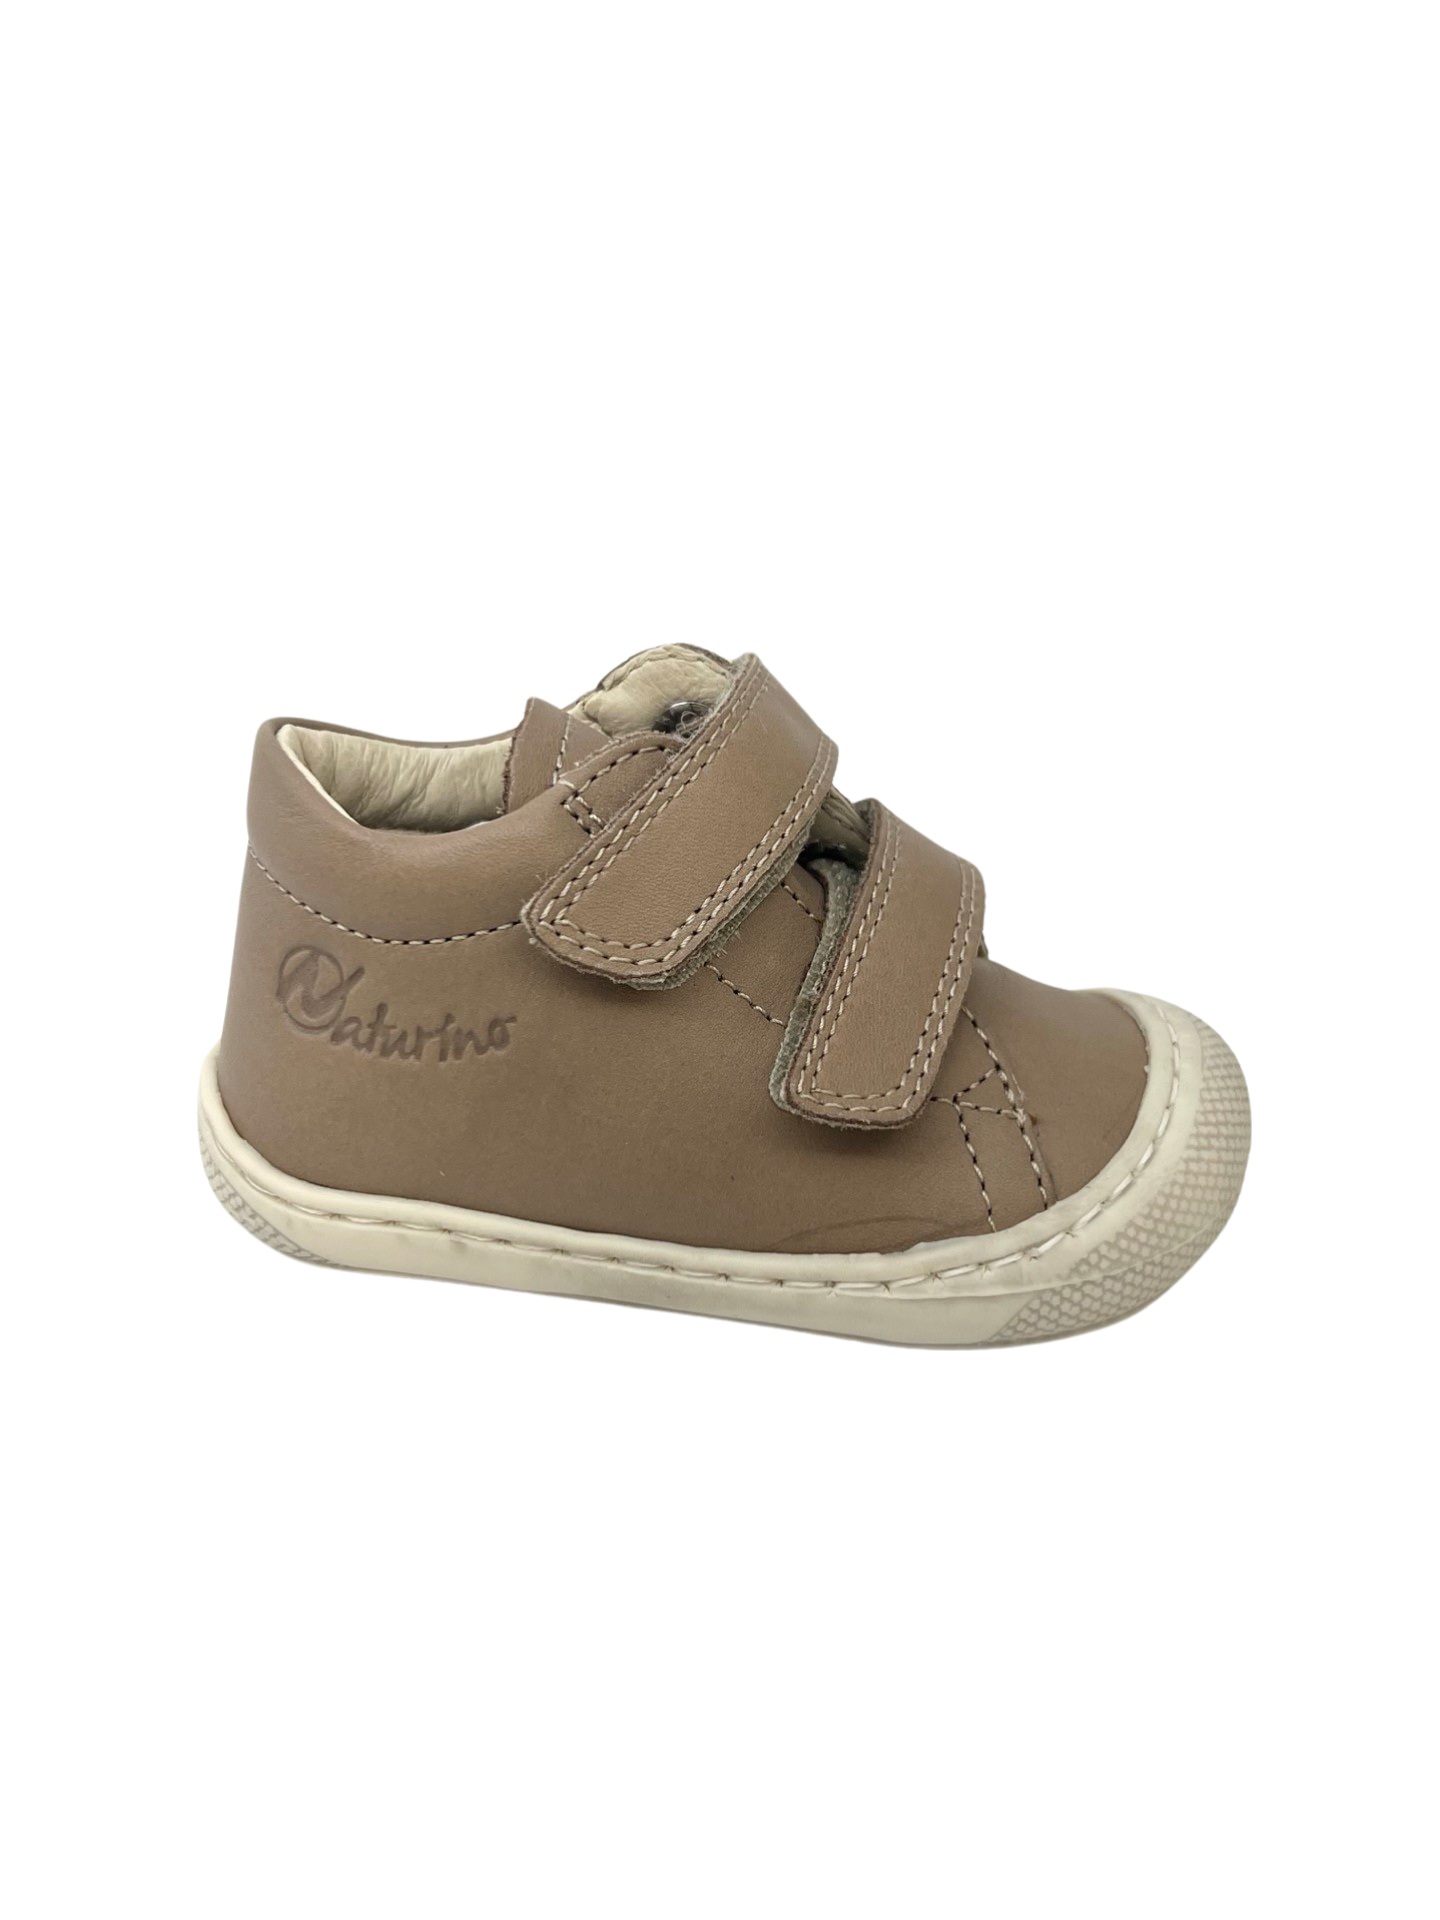 Naturino Taupe Double Velcro Sneaker - Cocoon